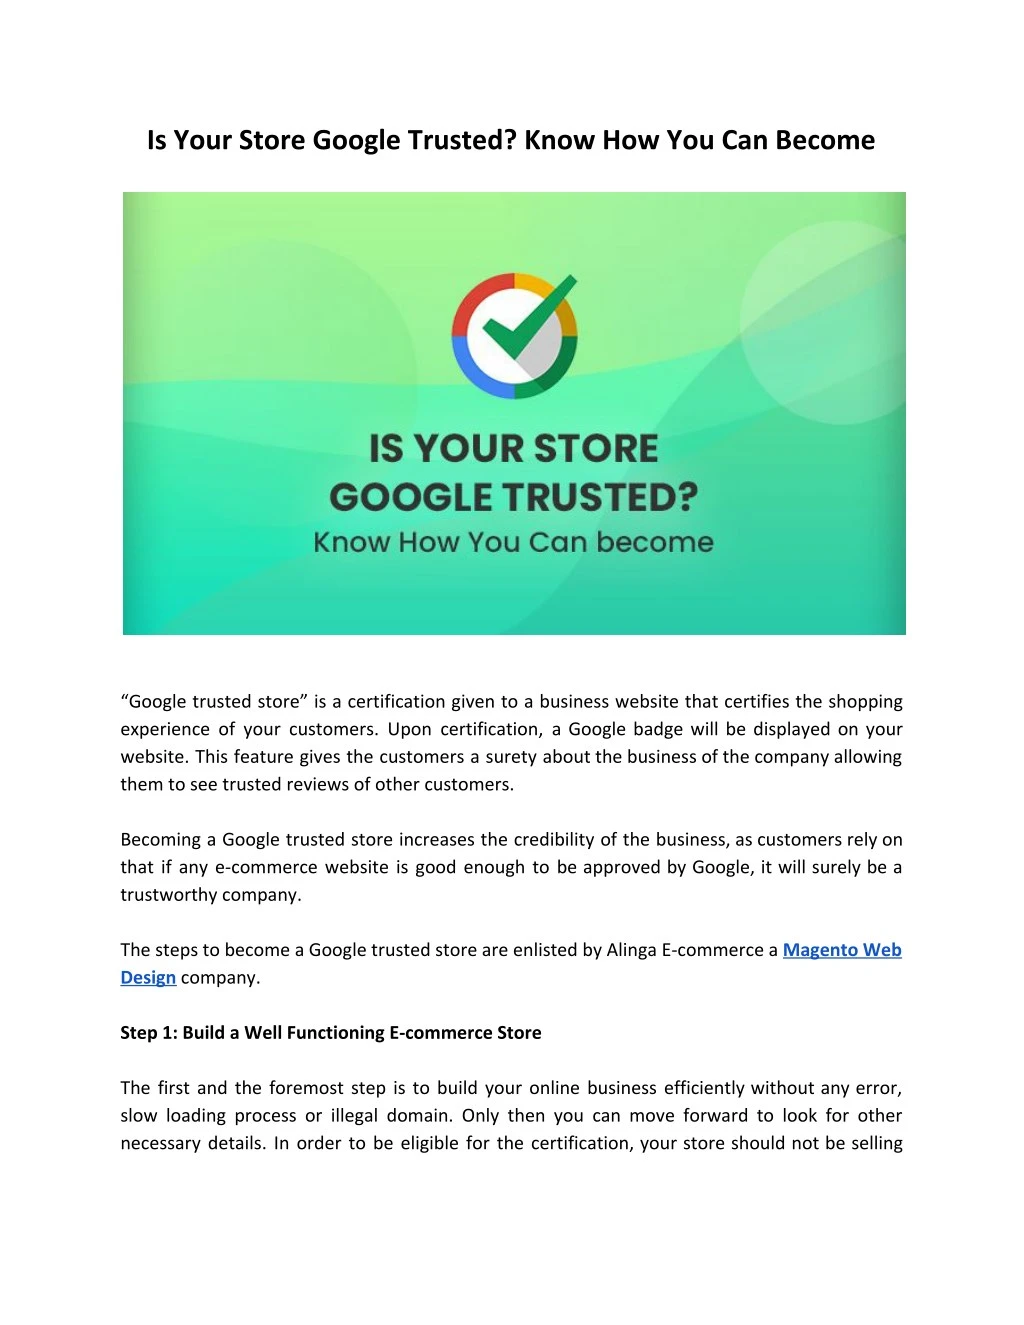 is your store google trusted know